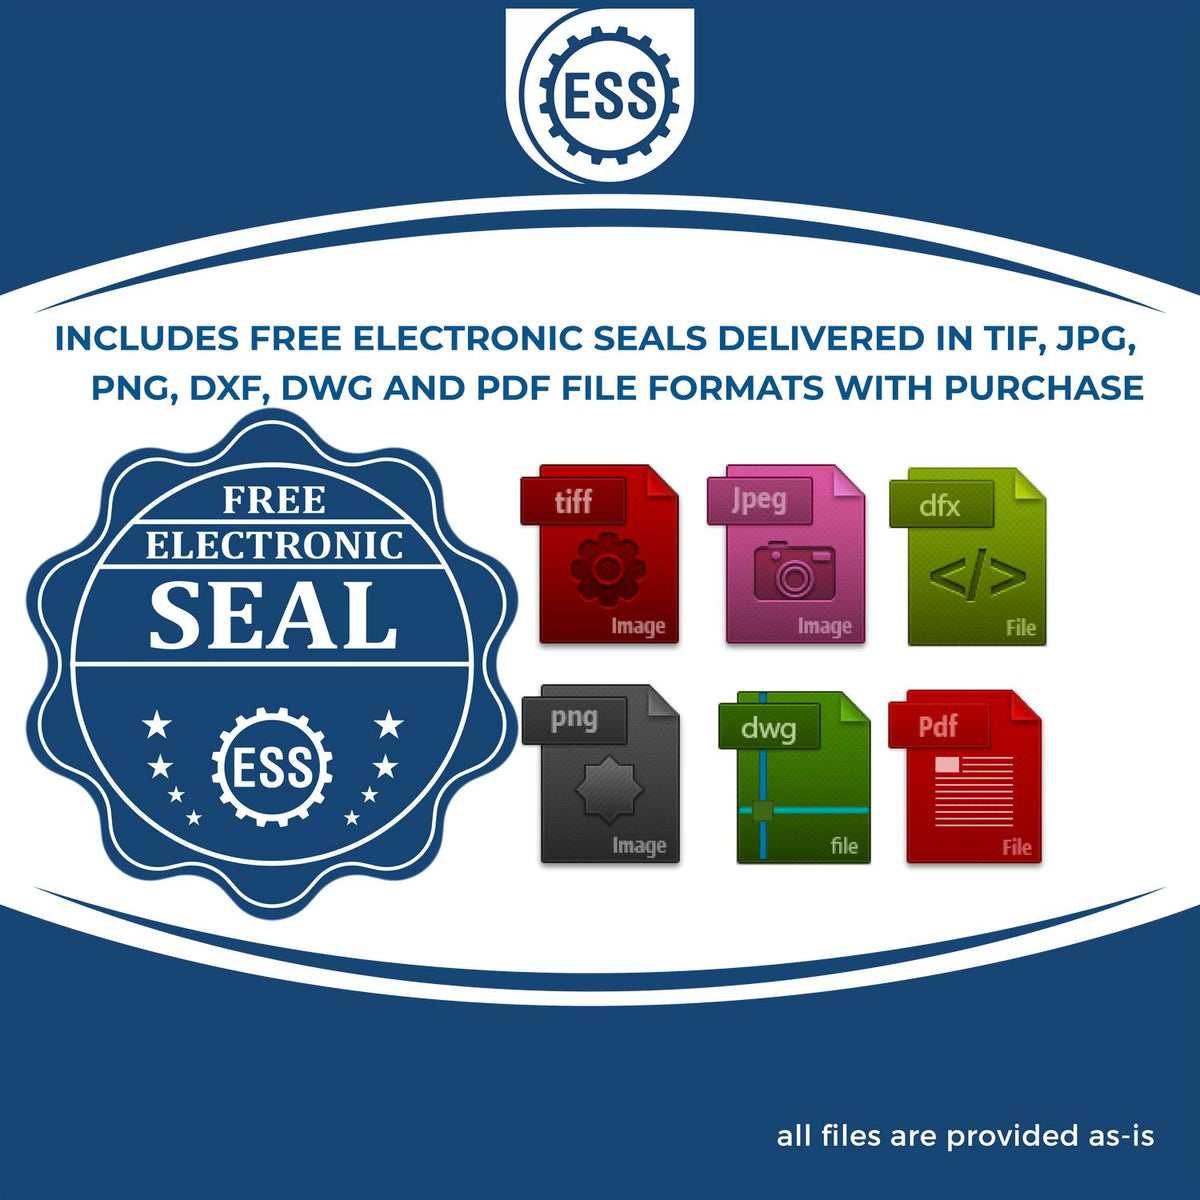 An infographic for the free electronic seal for the Mississippi Desk Architect Embossing Seal illustrating the different file type icons such as DXF, DWG, TIF, JPG and PNG.